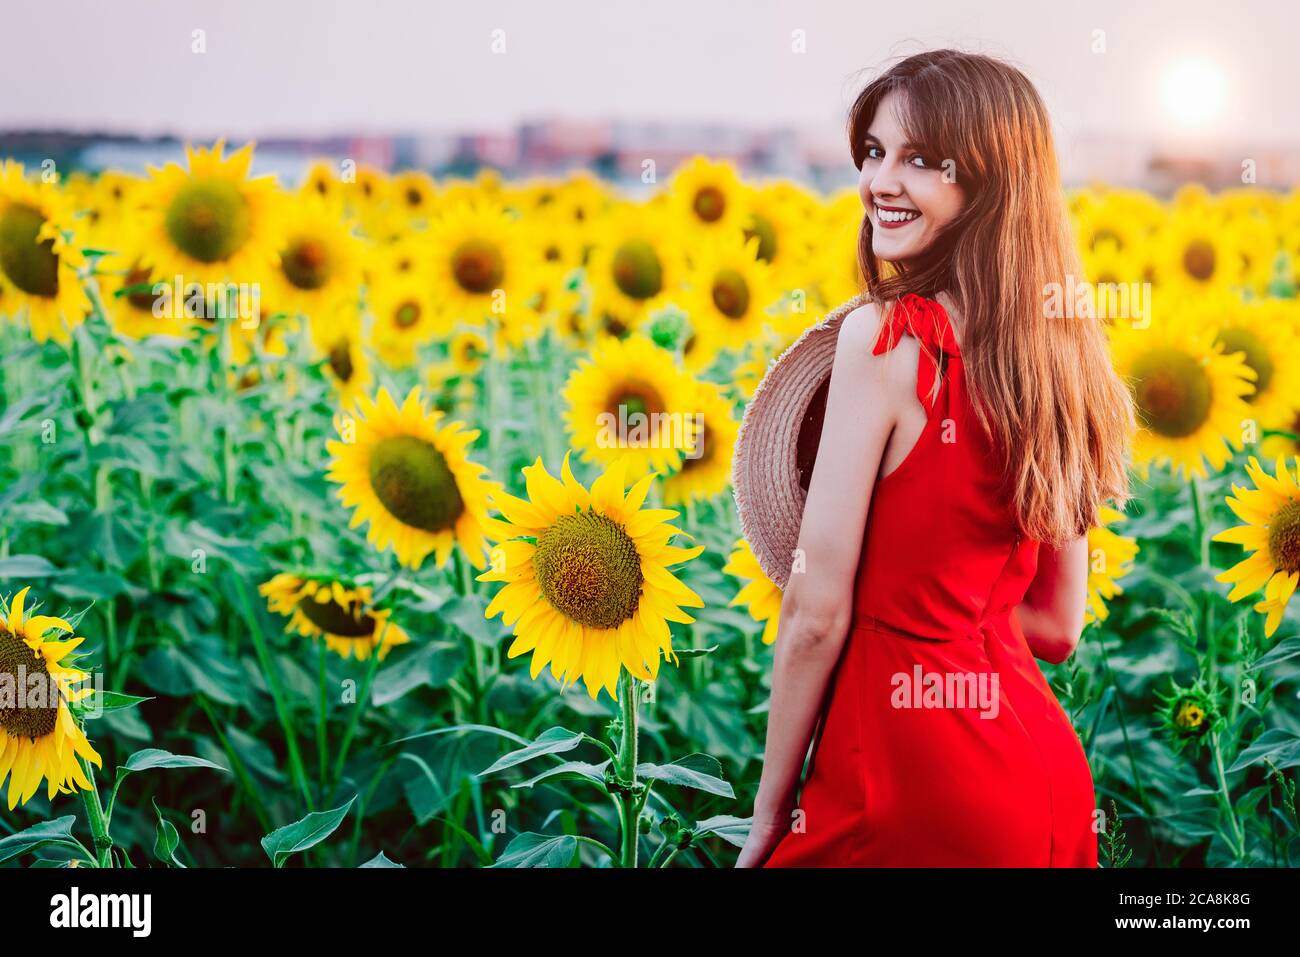 woman with red dress and hat in sunflowers field Stock Photo